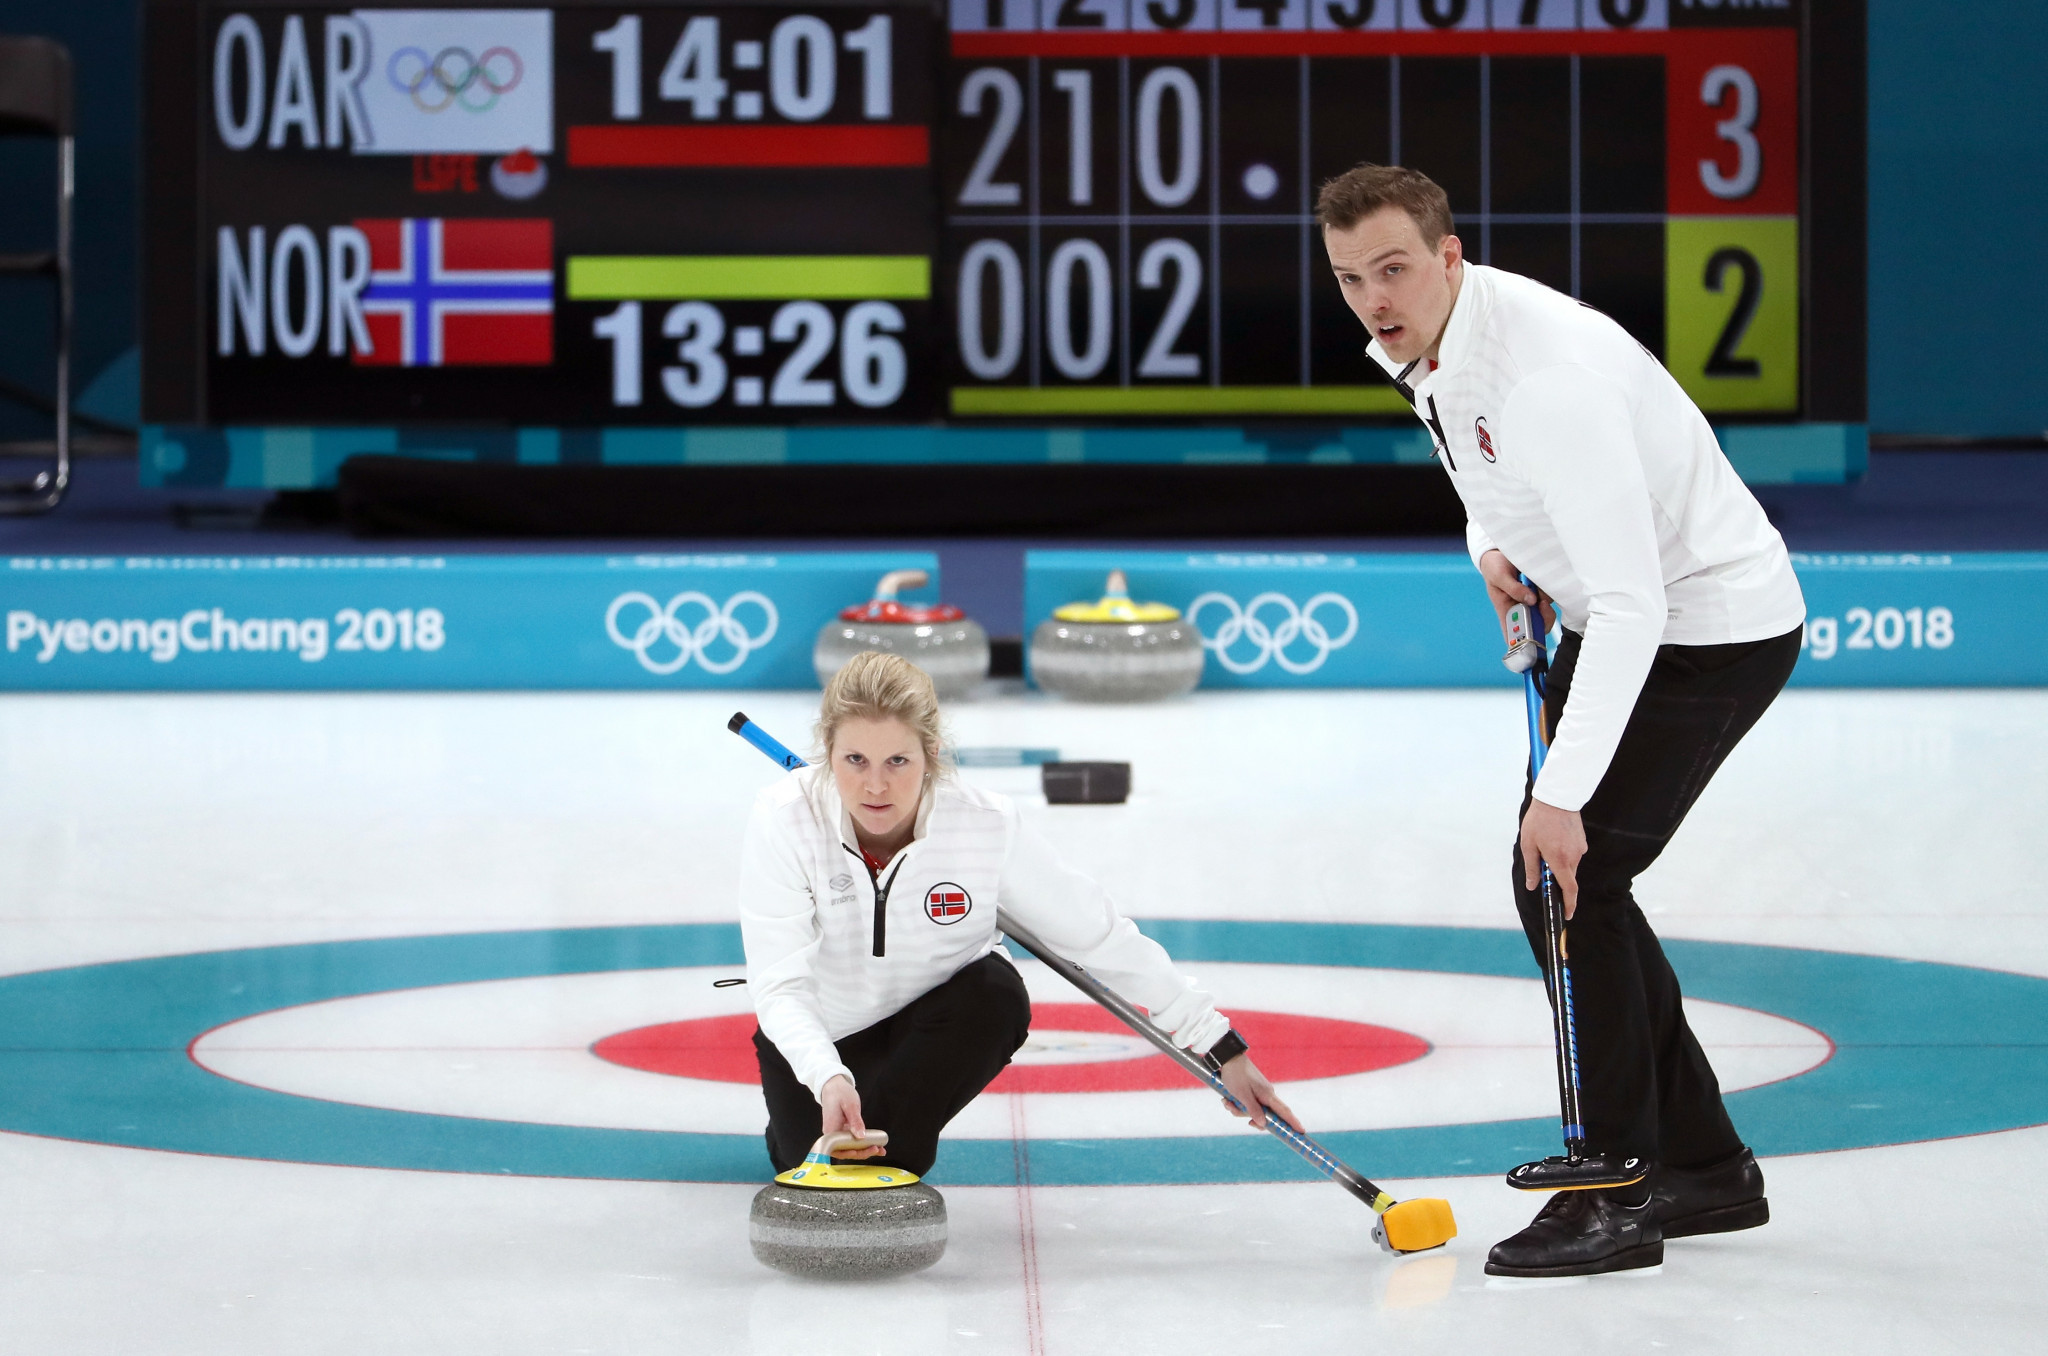 Norwegian mixed doubles curlers want special medal ceremony if awarded bronze after OAR positive drugs test